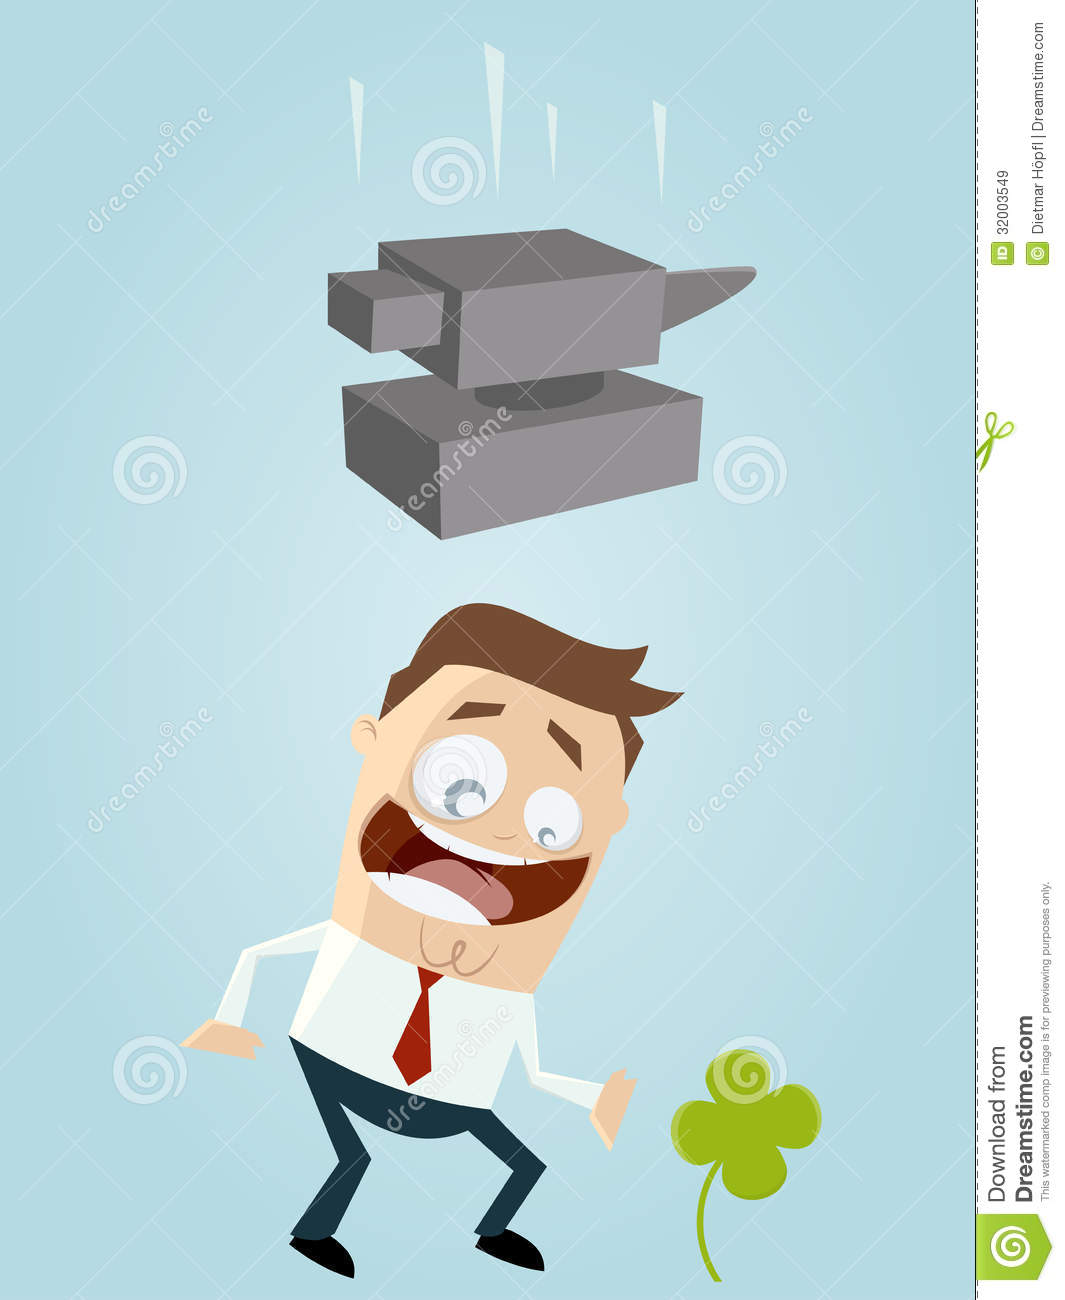 Royalty Free Stock Images  Luck And Bad Luck